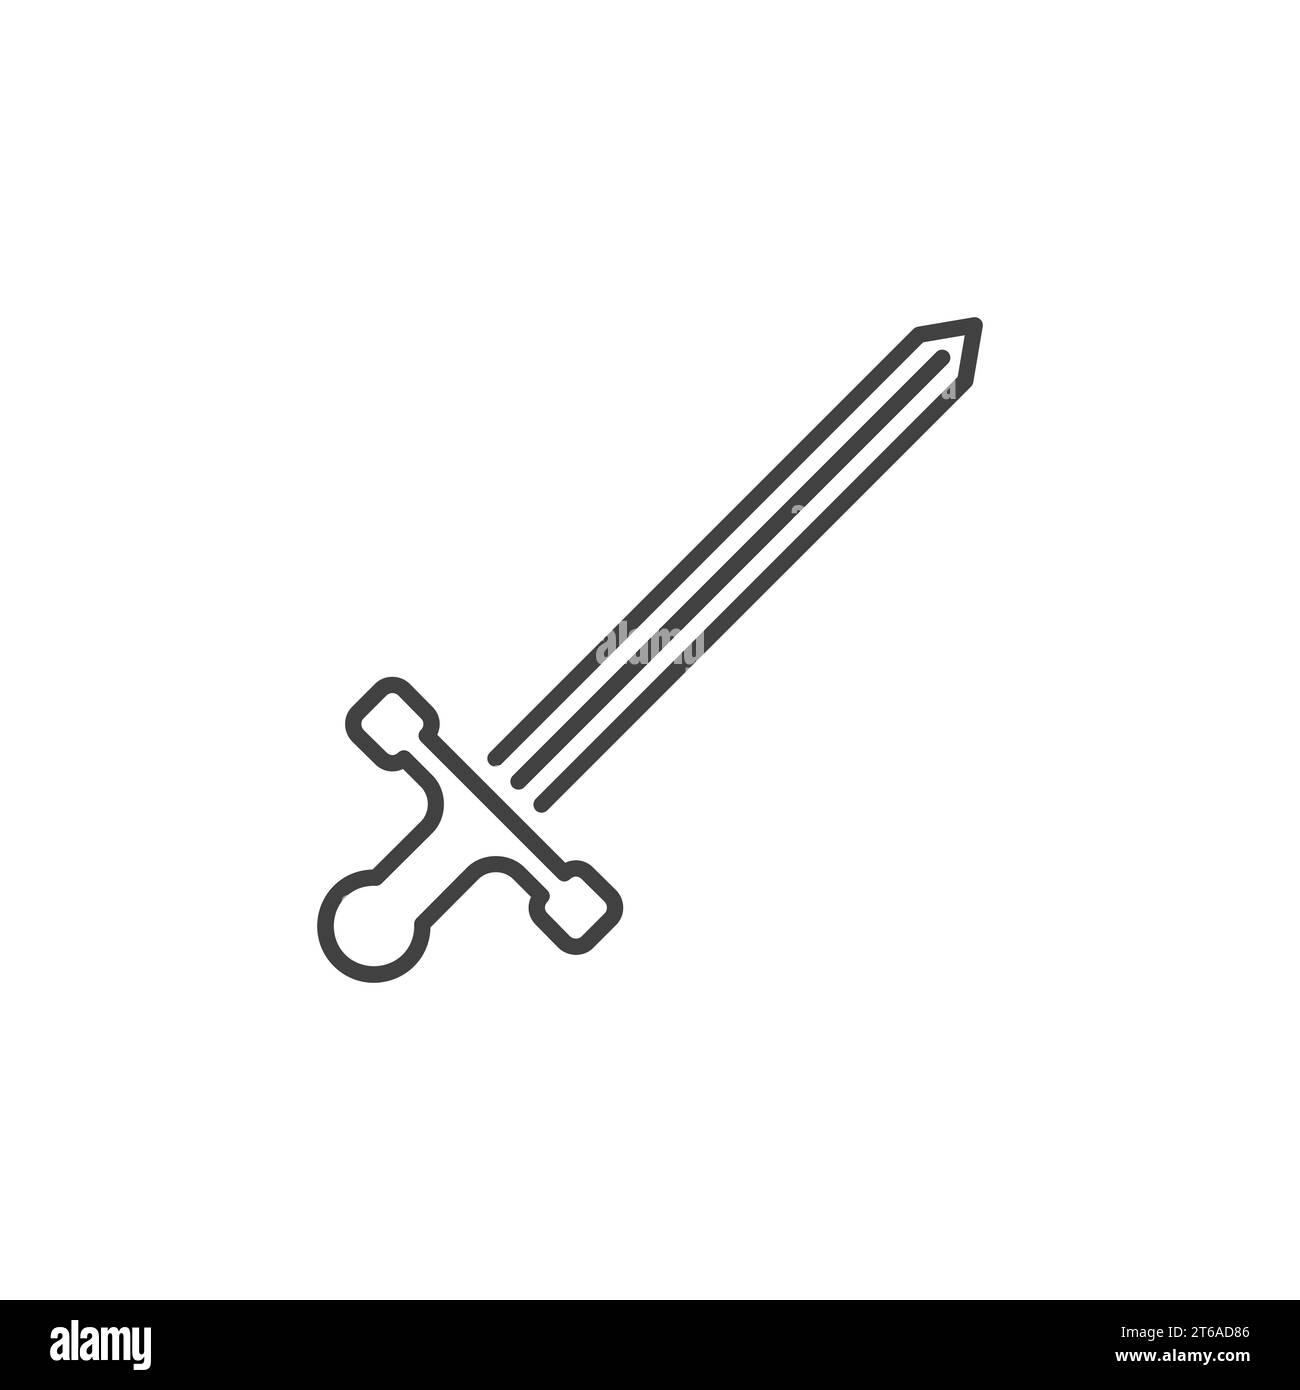 Sword vector concept simple icon or symbol in linear style Stock Vector